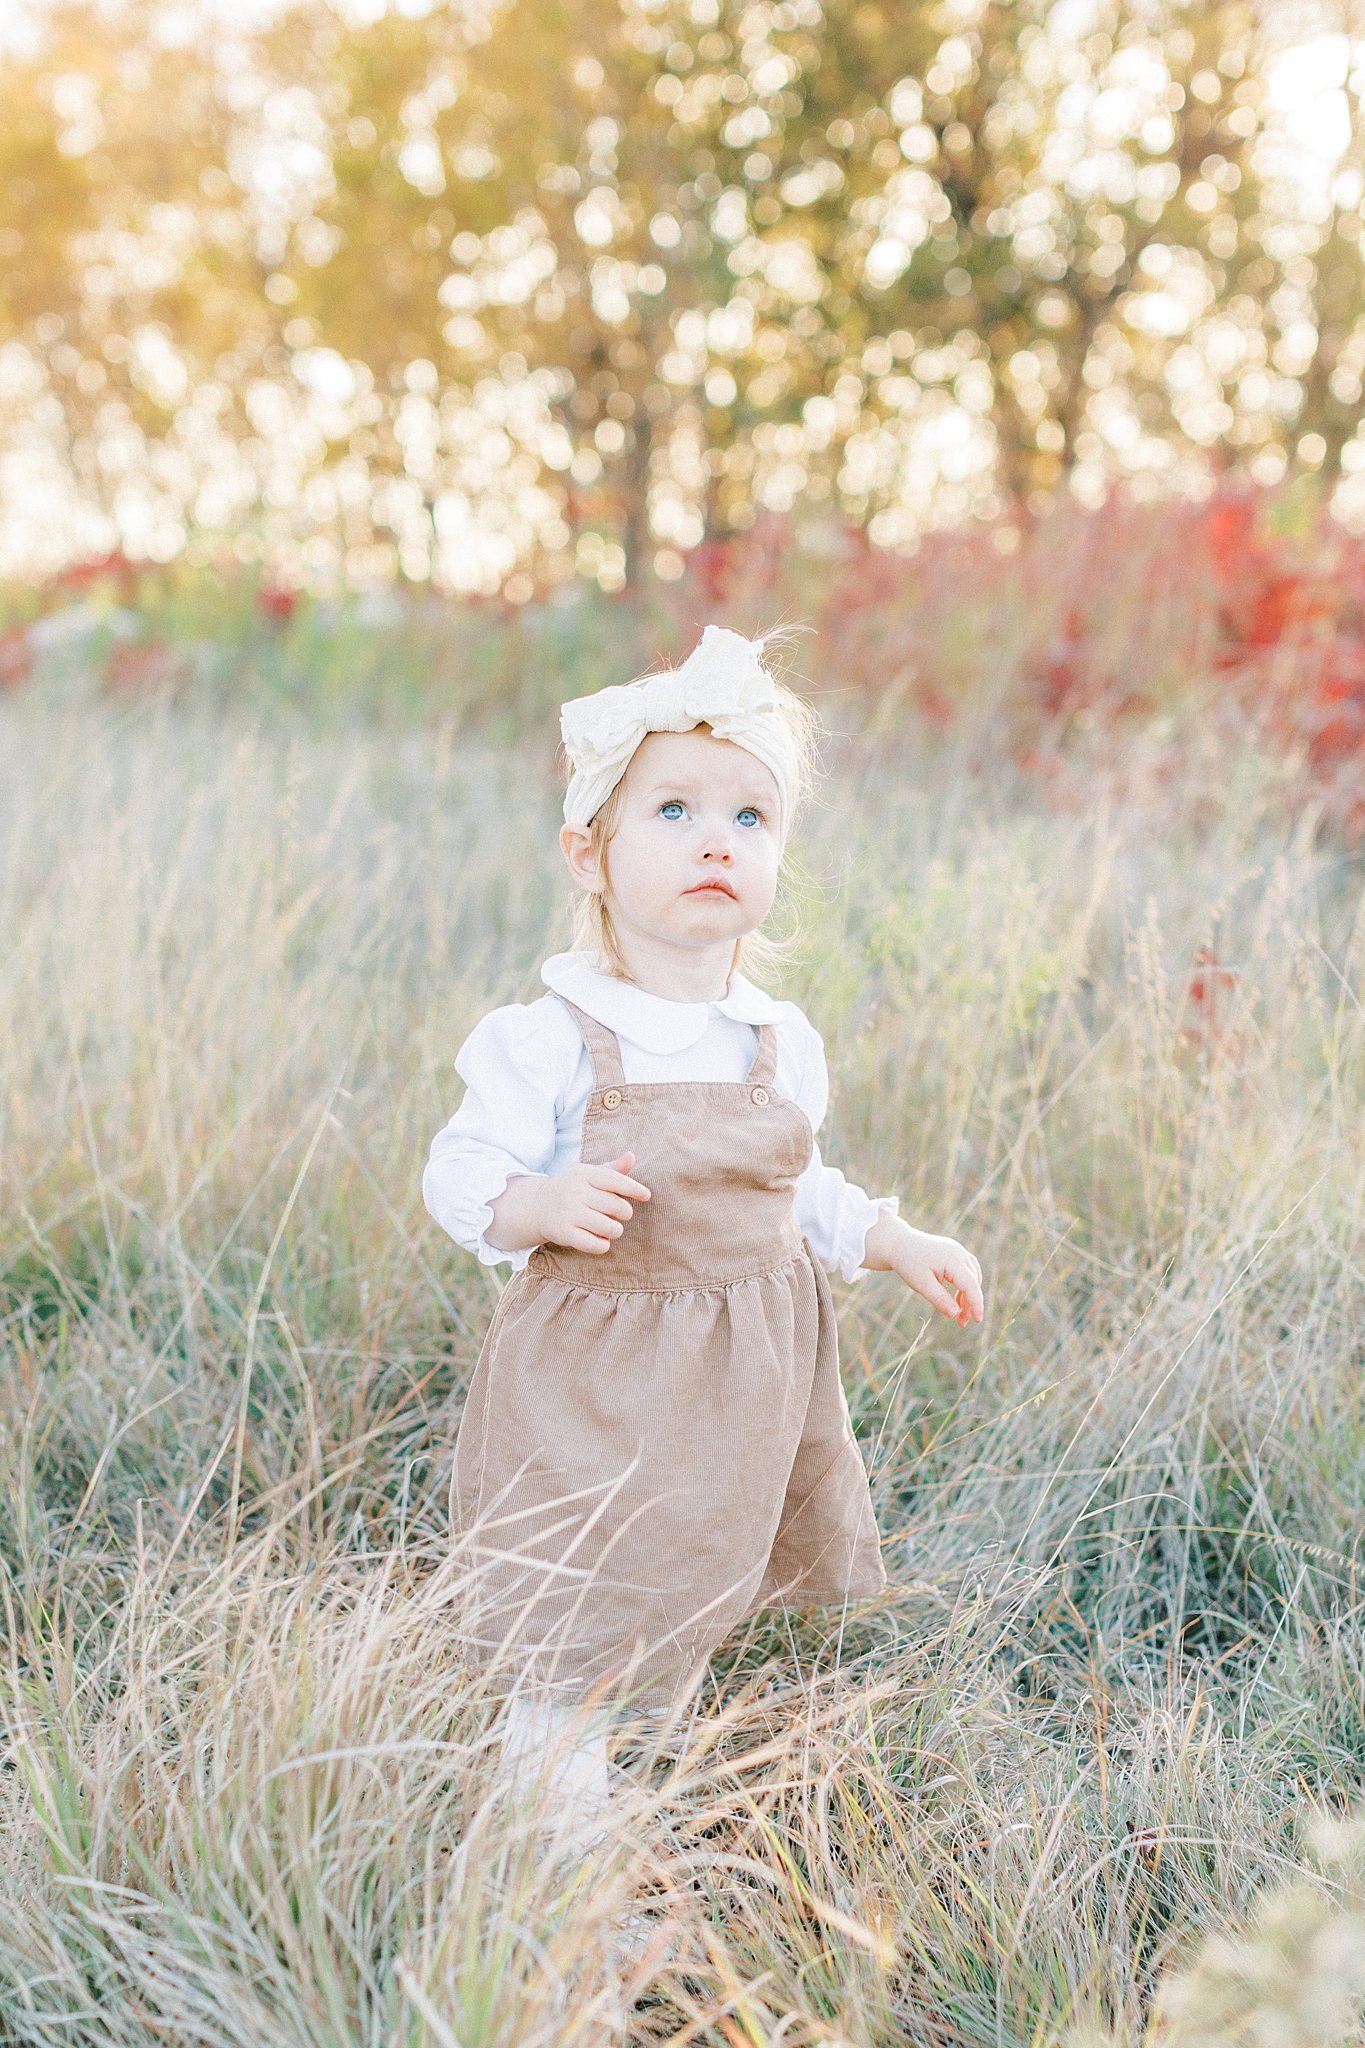 A young toddler girl in a brown dress looks up at some trees while wandering a field of tall grass at sunset Things to do in Dallas with Toddlers